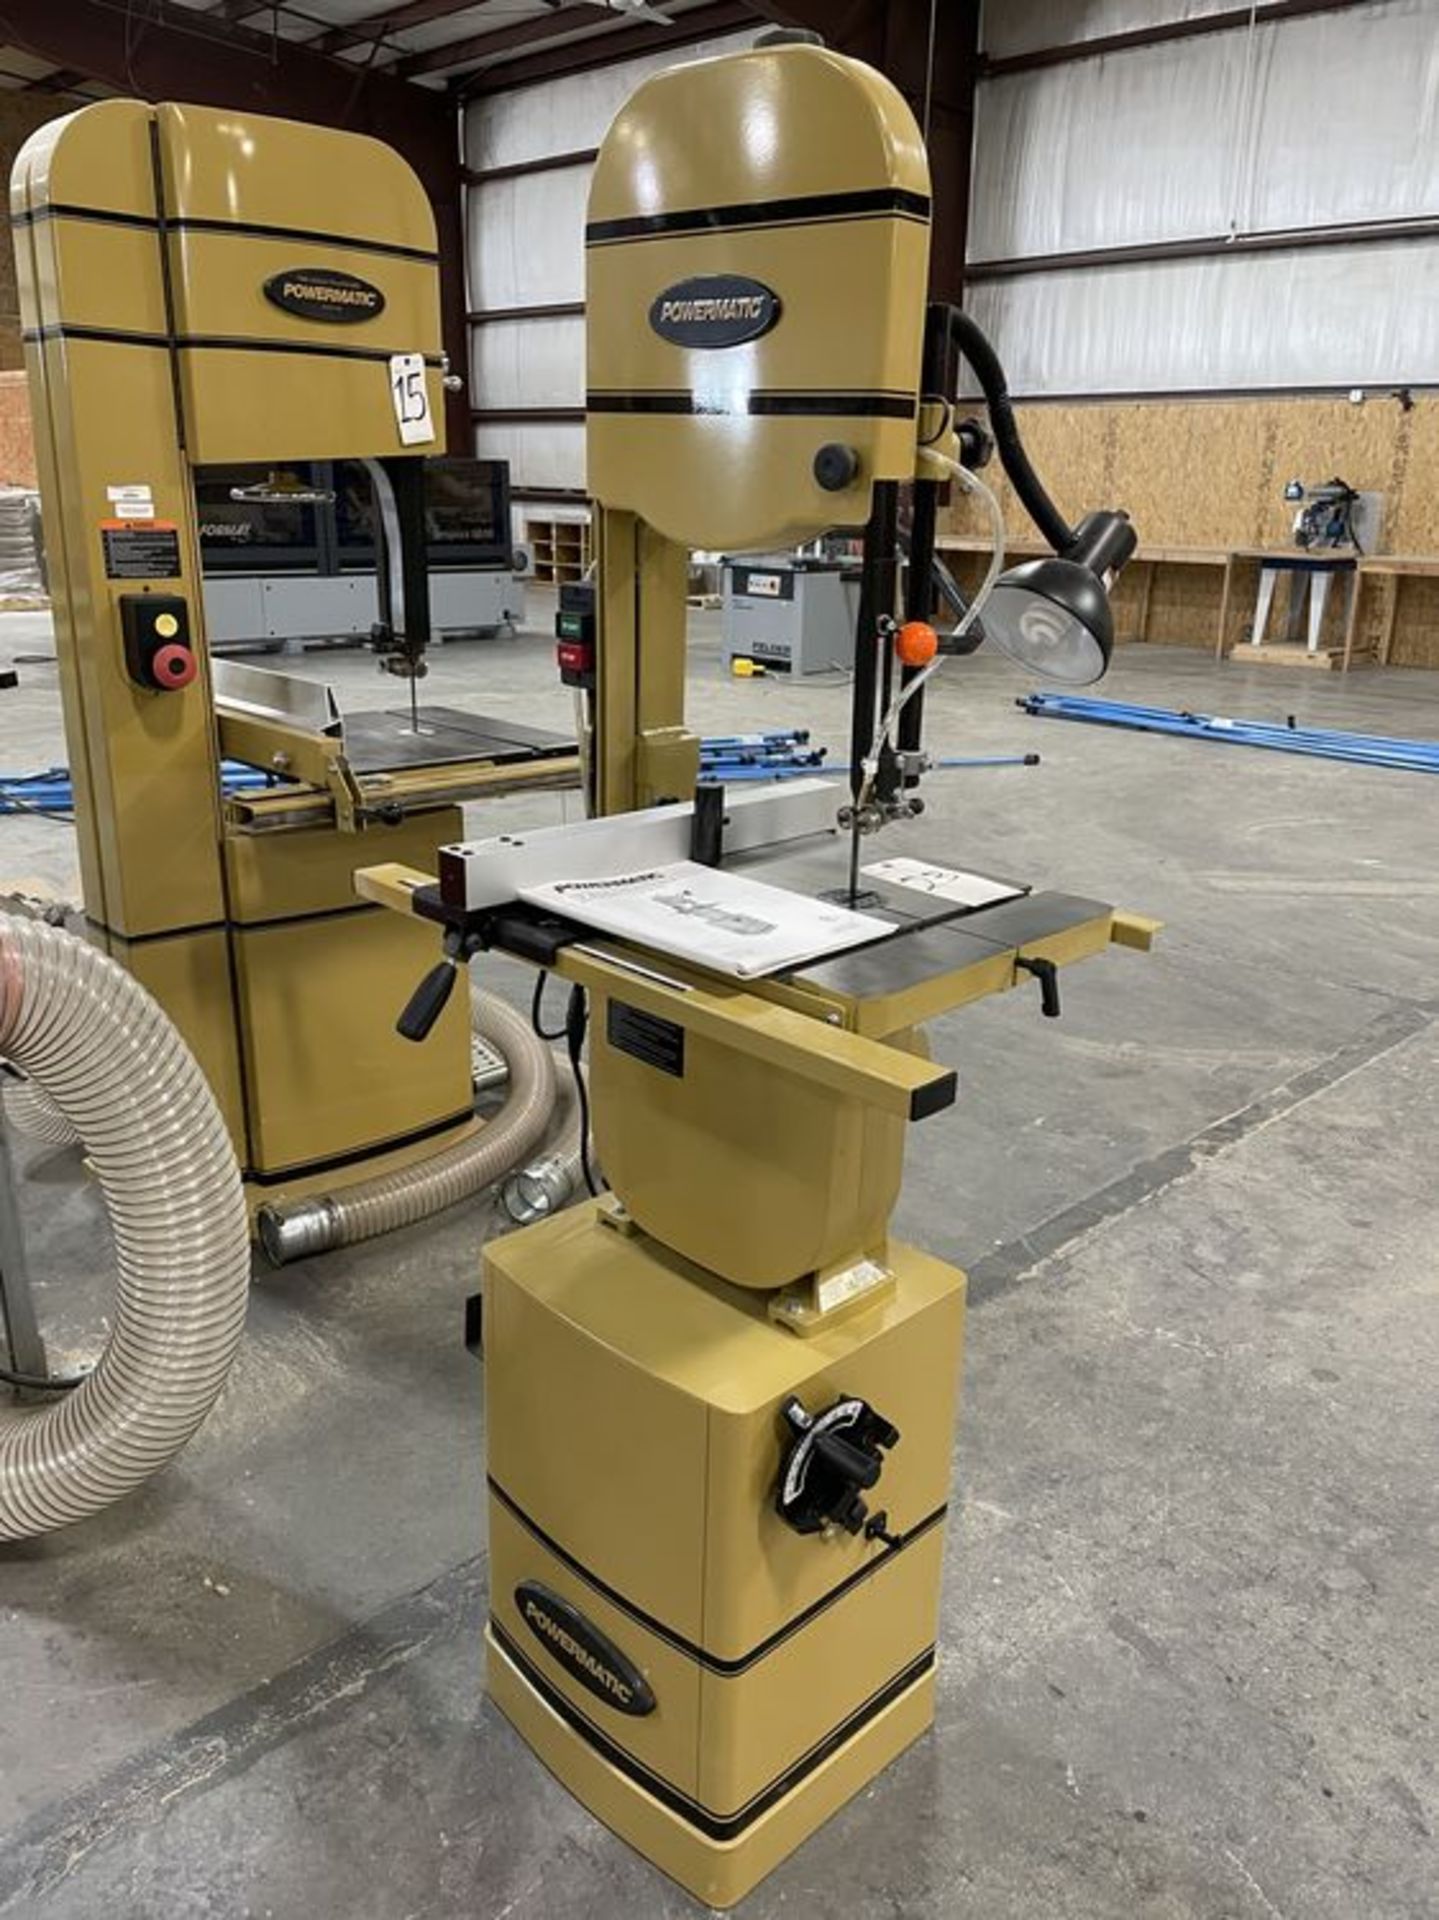 2019 Powermatic PWBS-14 14" Vertical Bandsaw. SN 19120769, Year 2019. Equipped with 1.5 HP motor, - Image 2 of 7